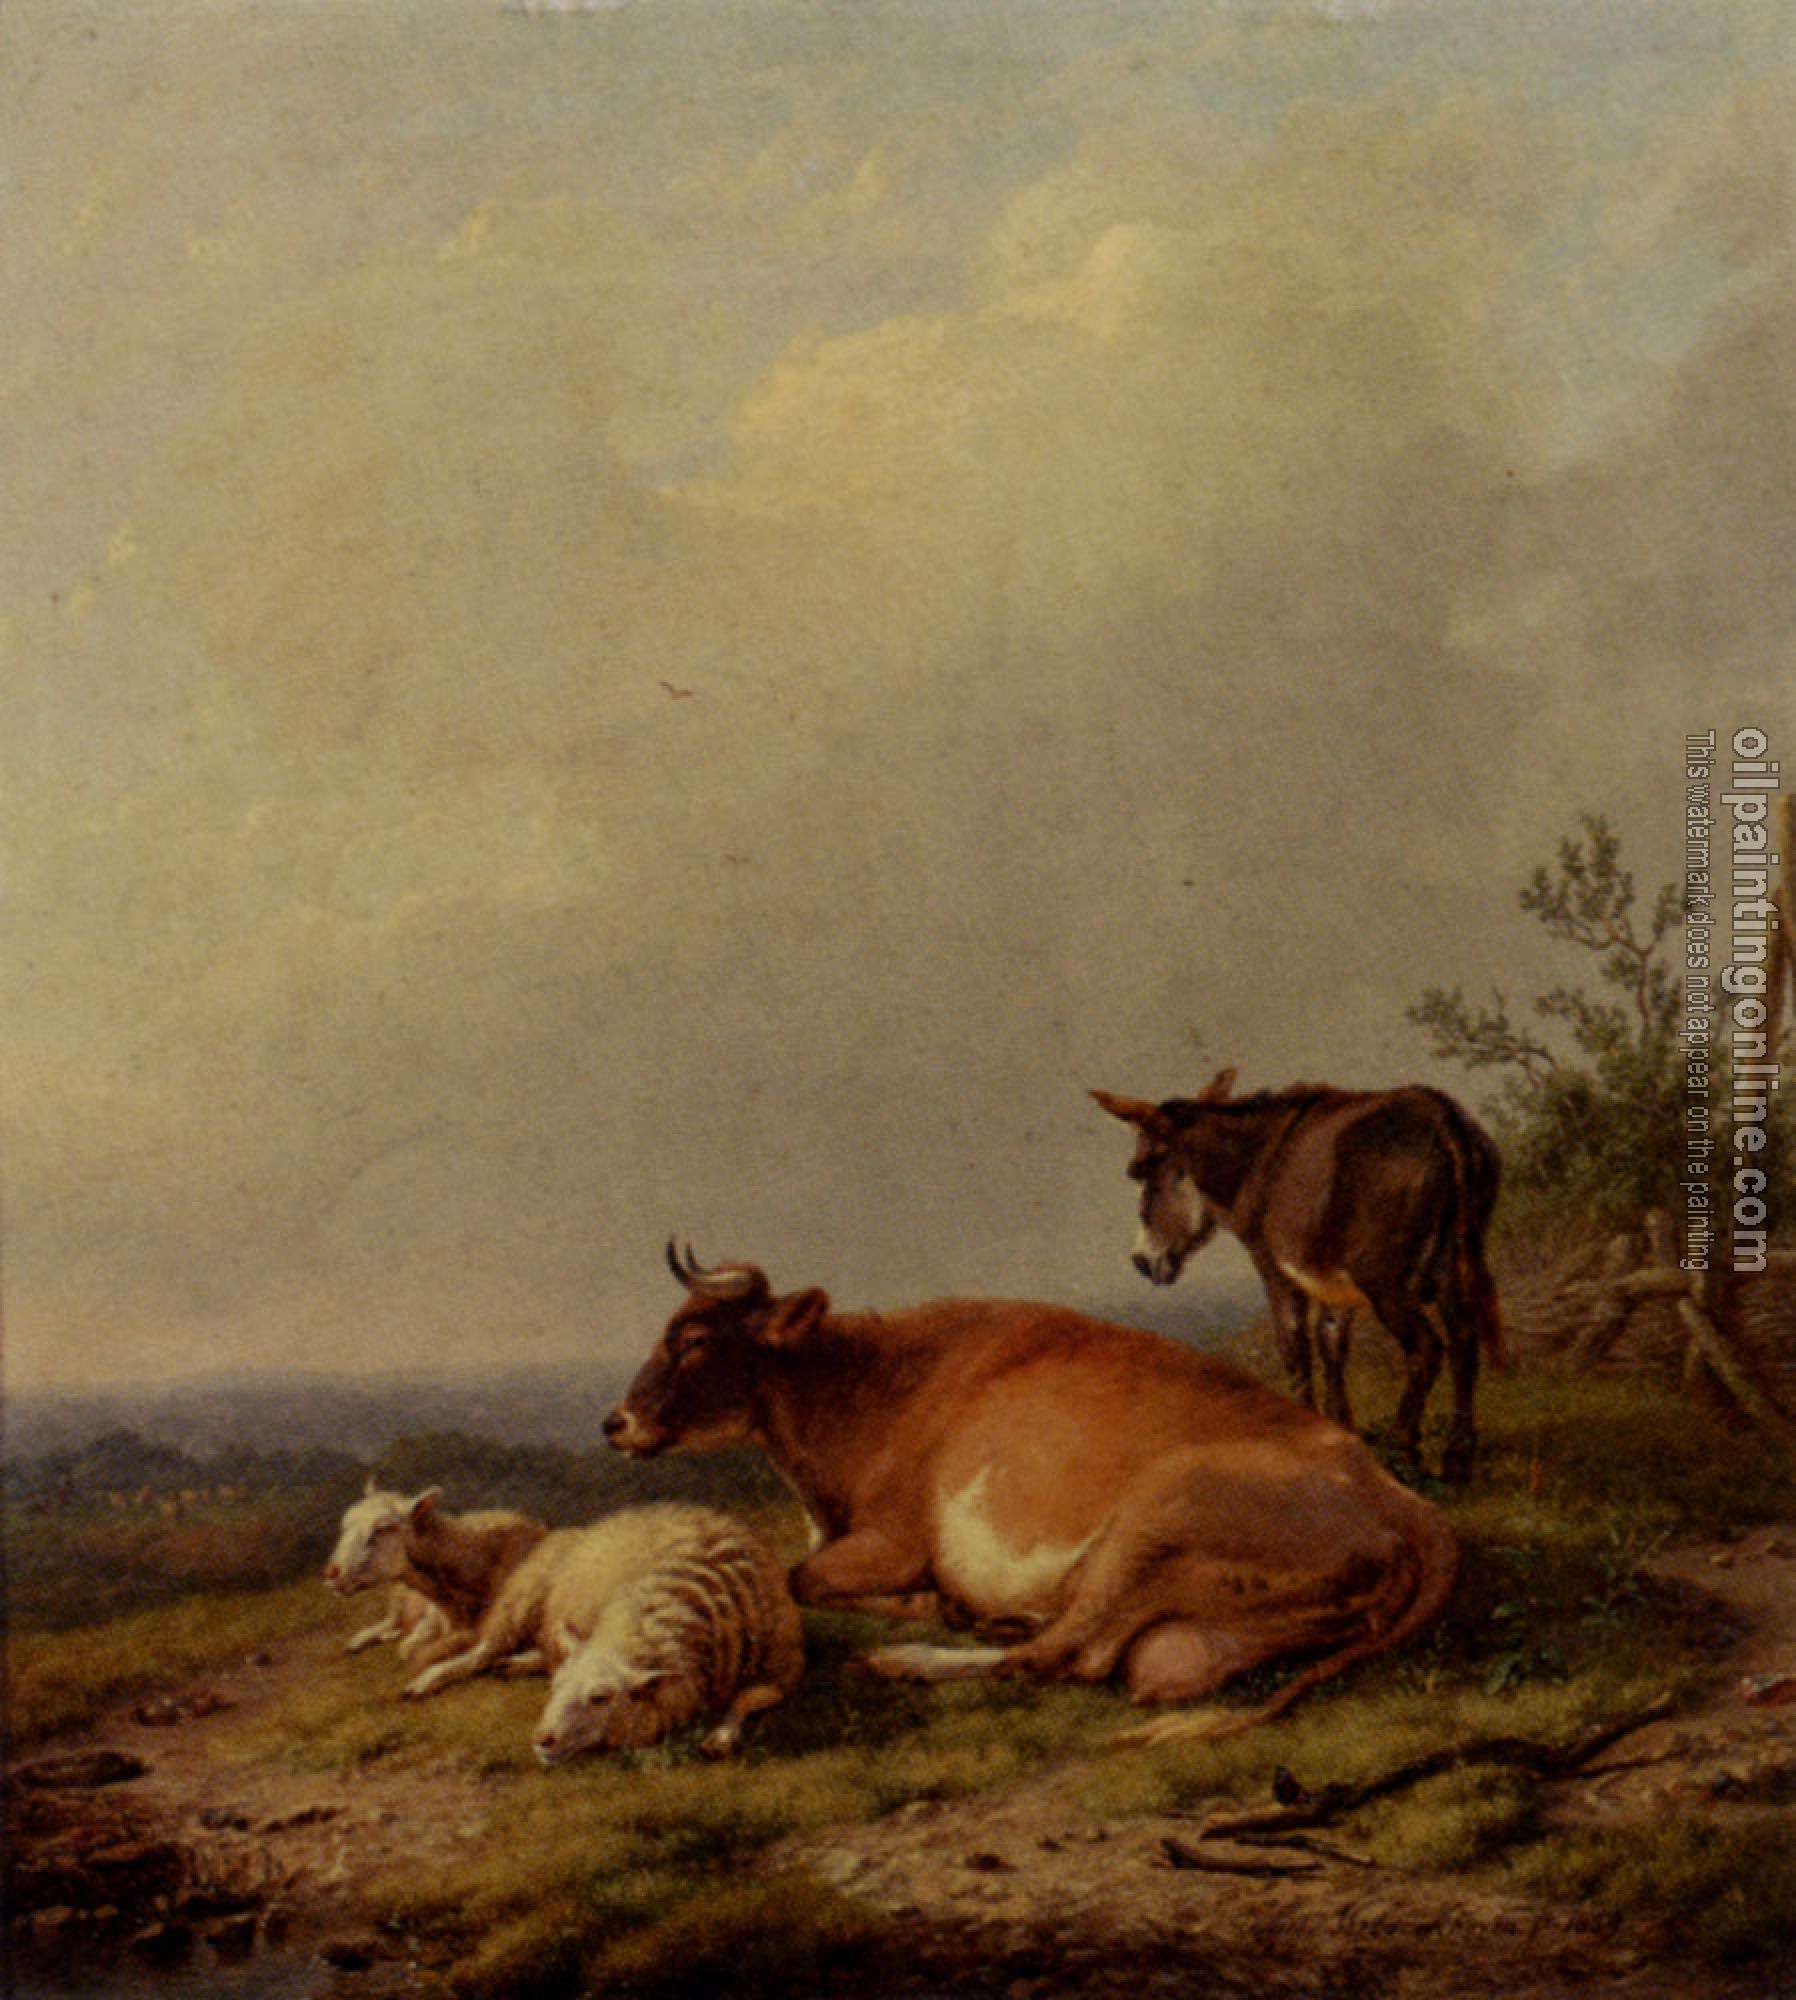 Verboeckhoven, Eugene Joseph - A Cow A Sheep And A Donkey